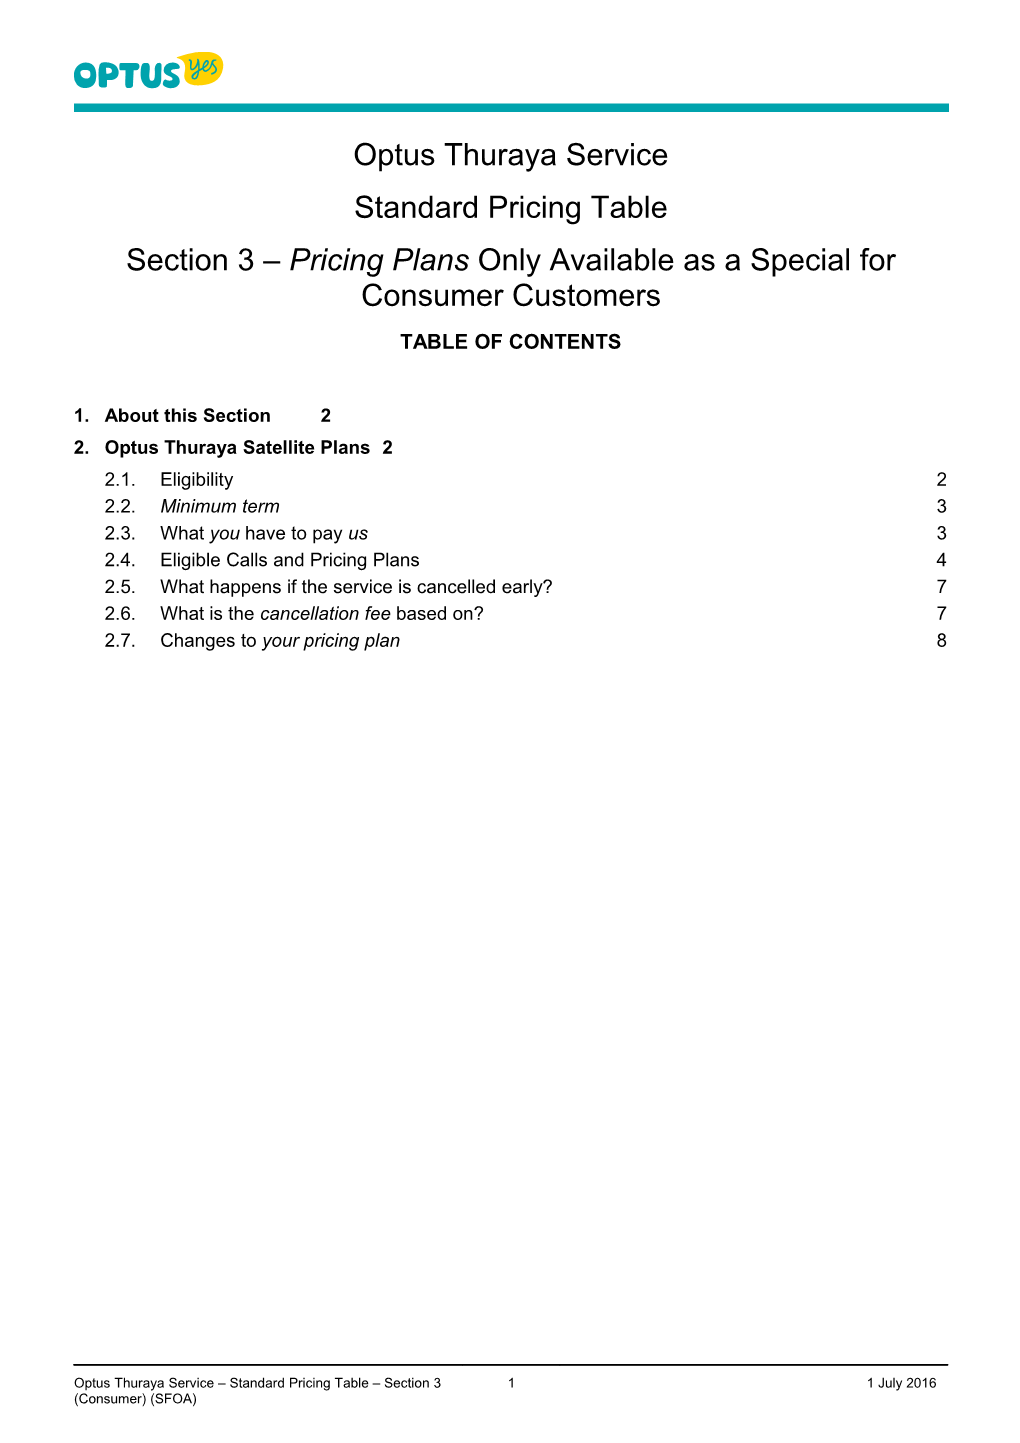 Section 3 Pricing Plans Only Available As a Special for Consumer Customers